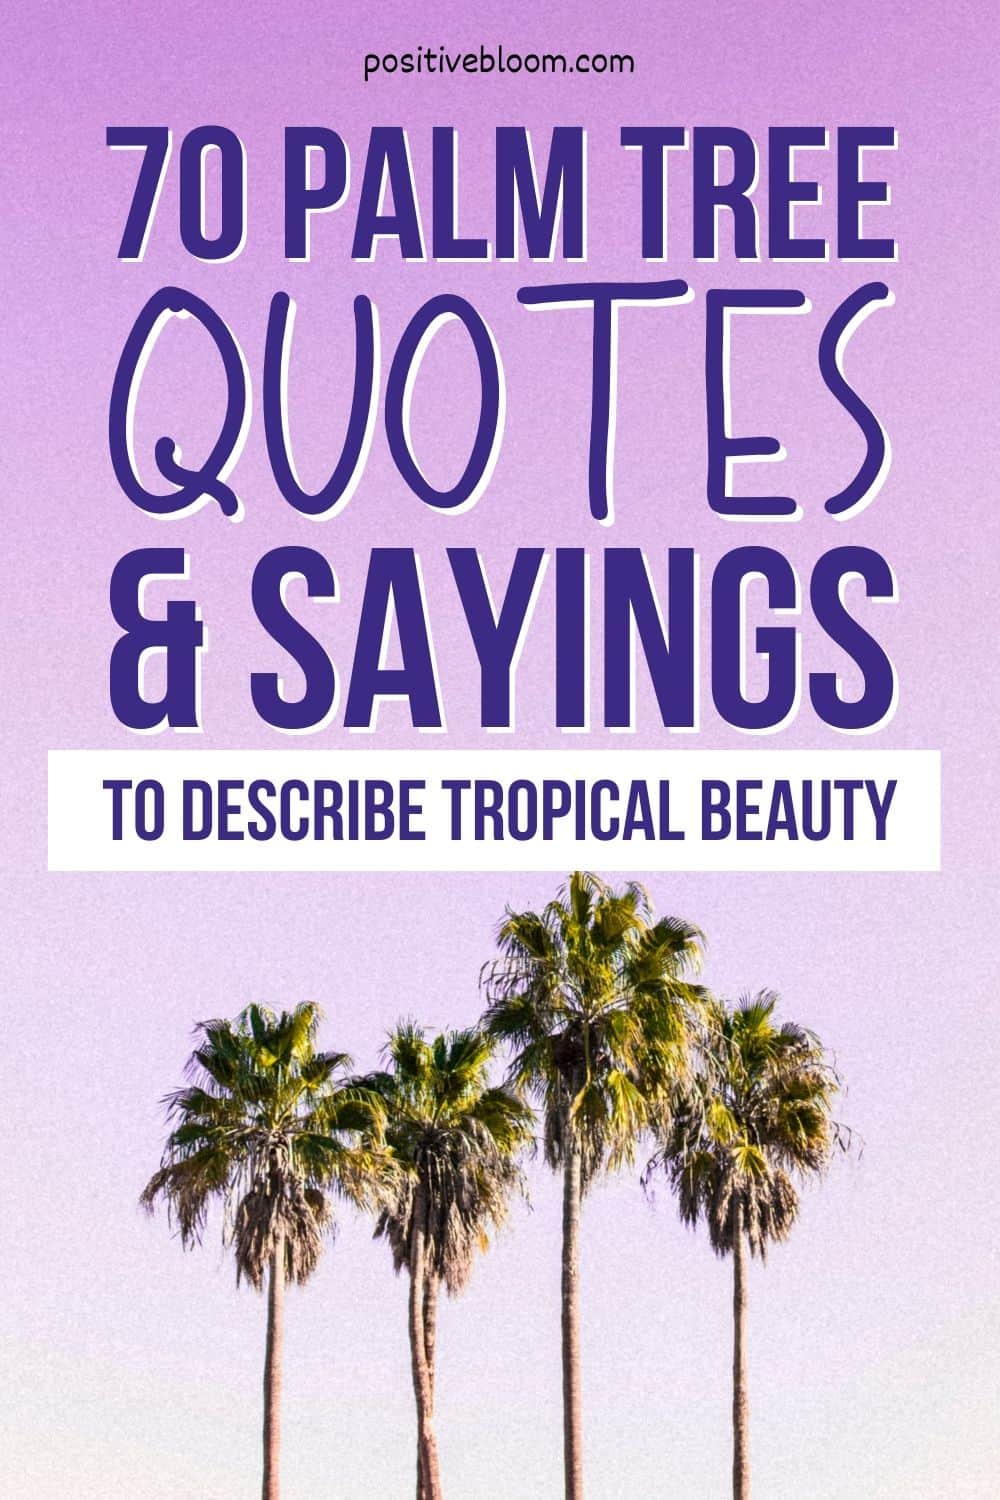 70 Palm Tree Quotes & Sayings To Describe Tropical Beauty Pinterest